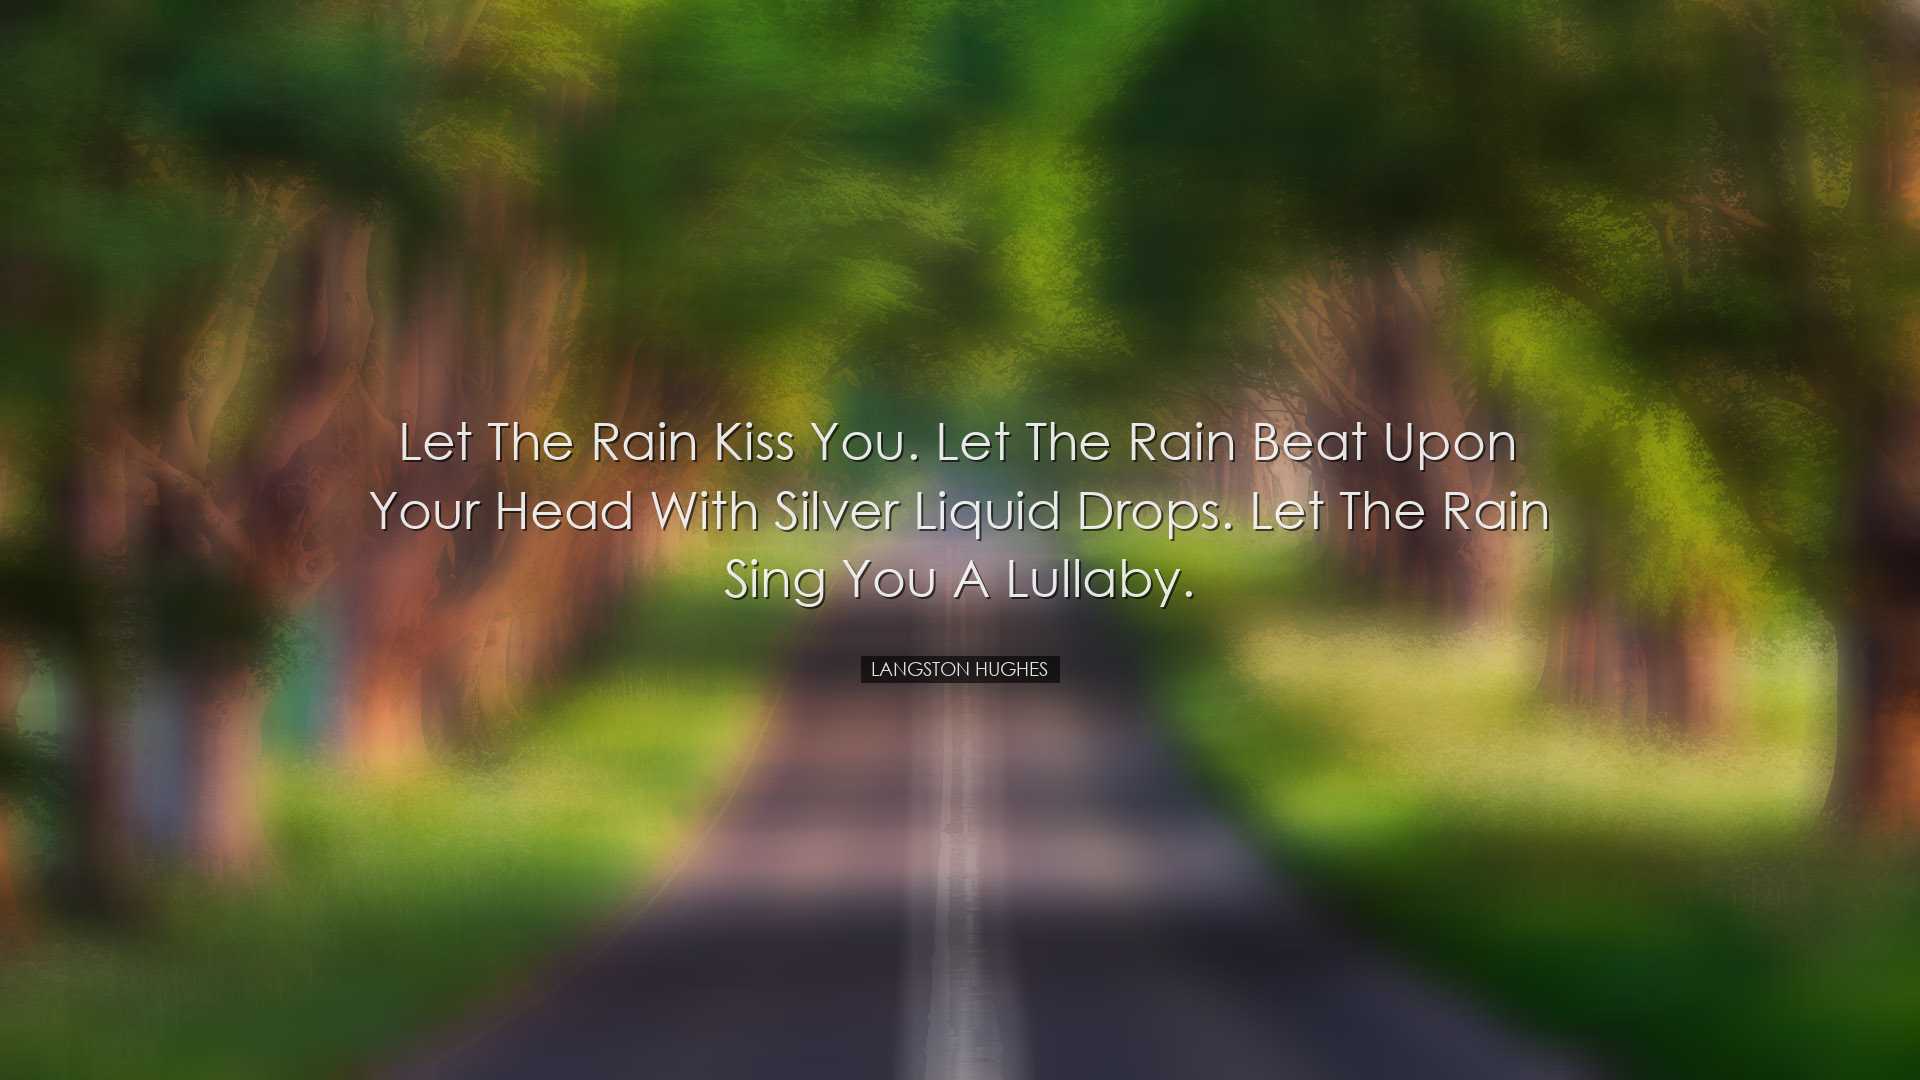 Let the rain kiss you. Let the rain beat upon your head with silve